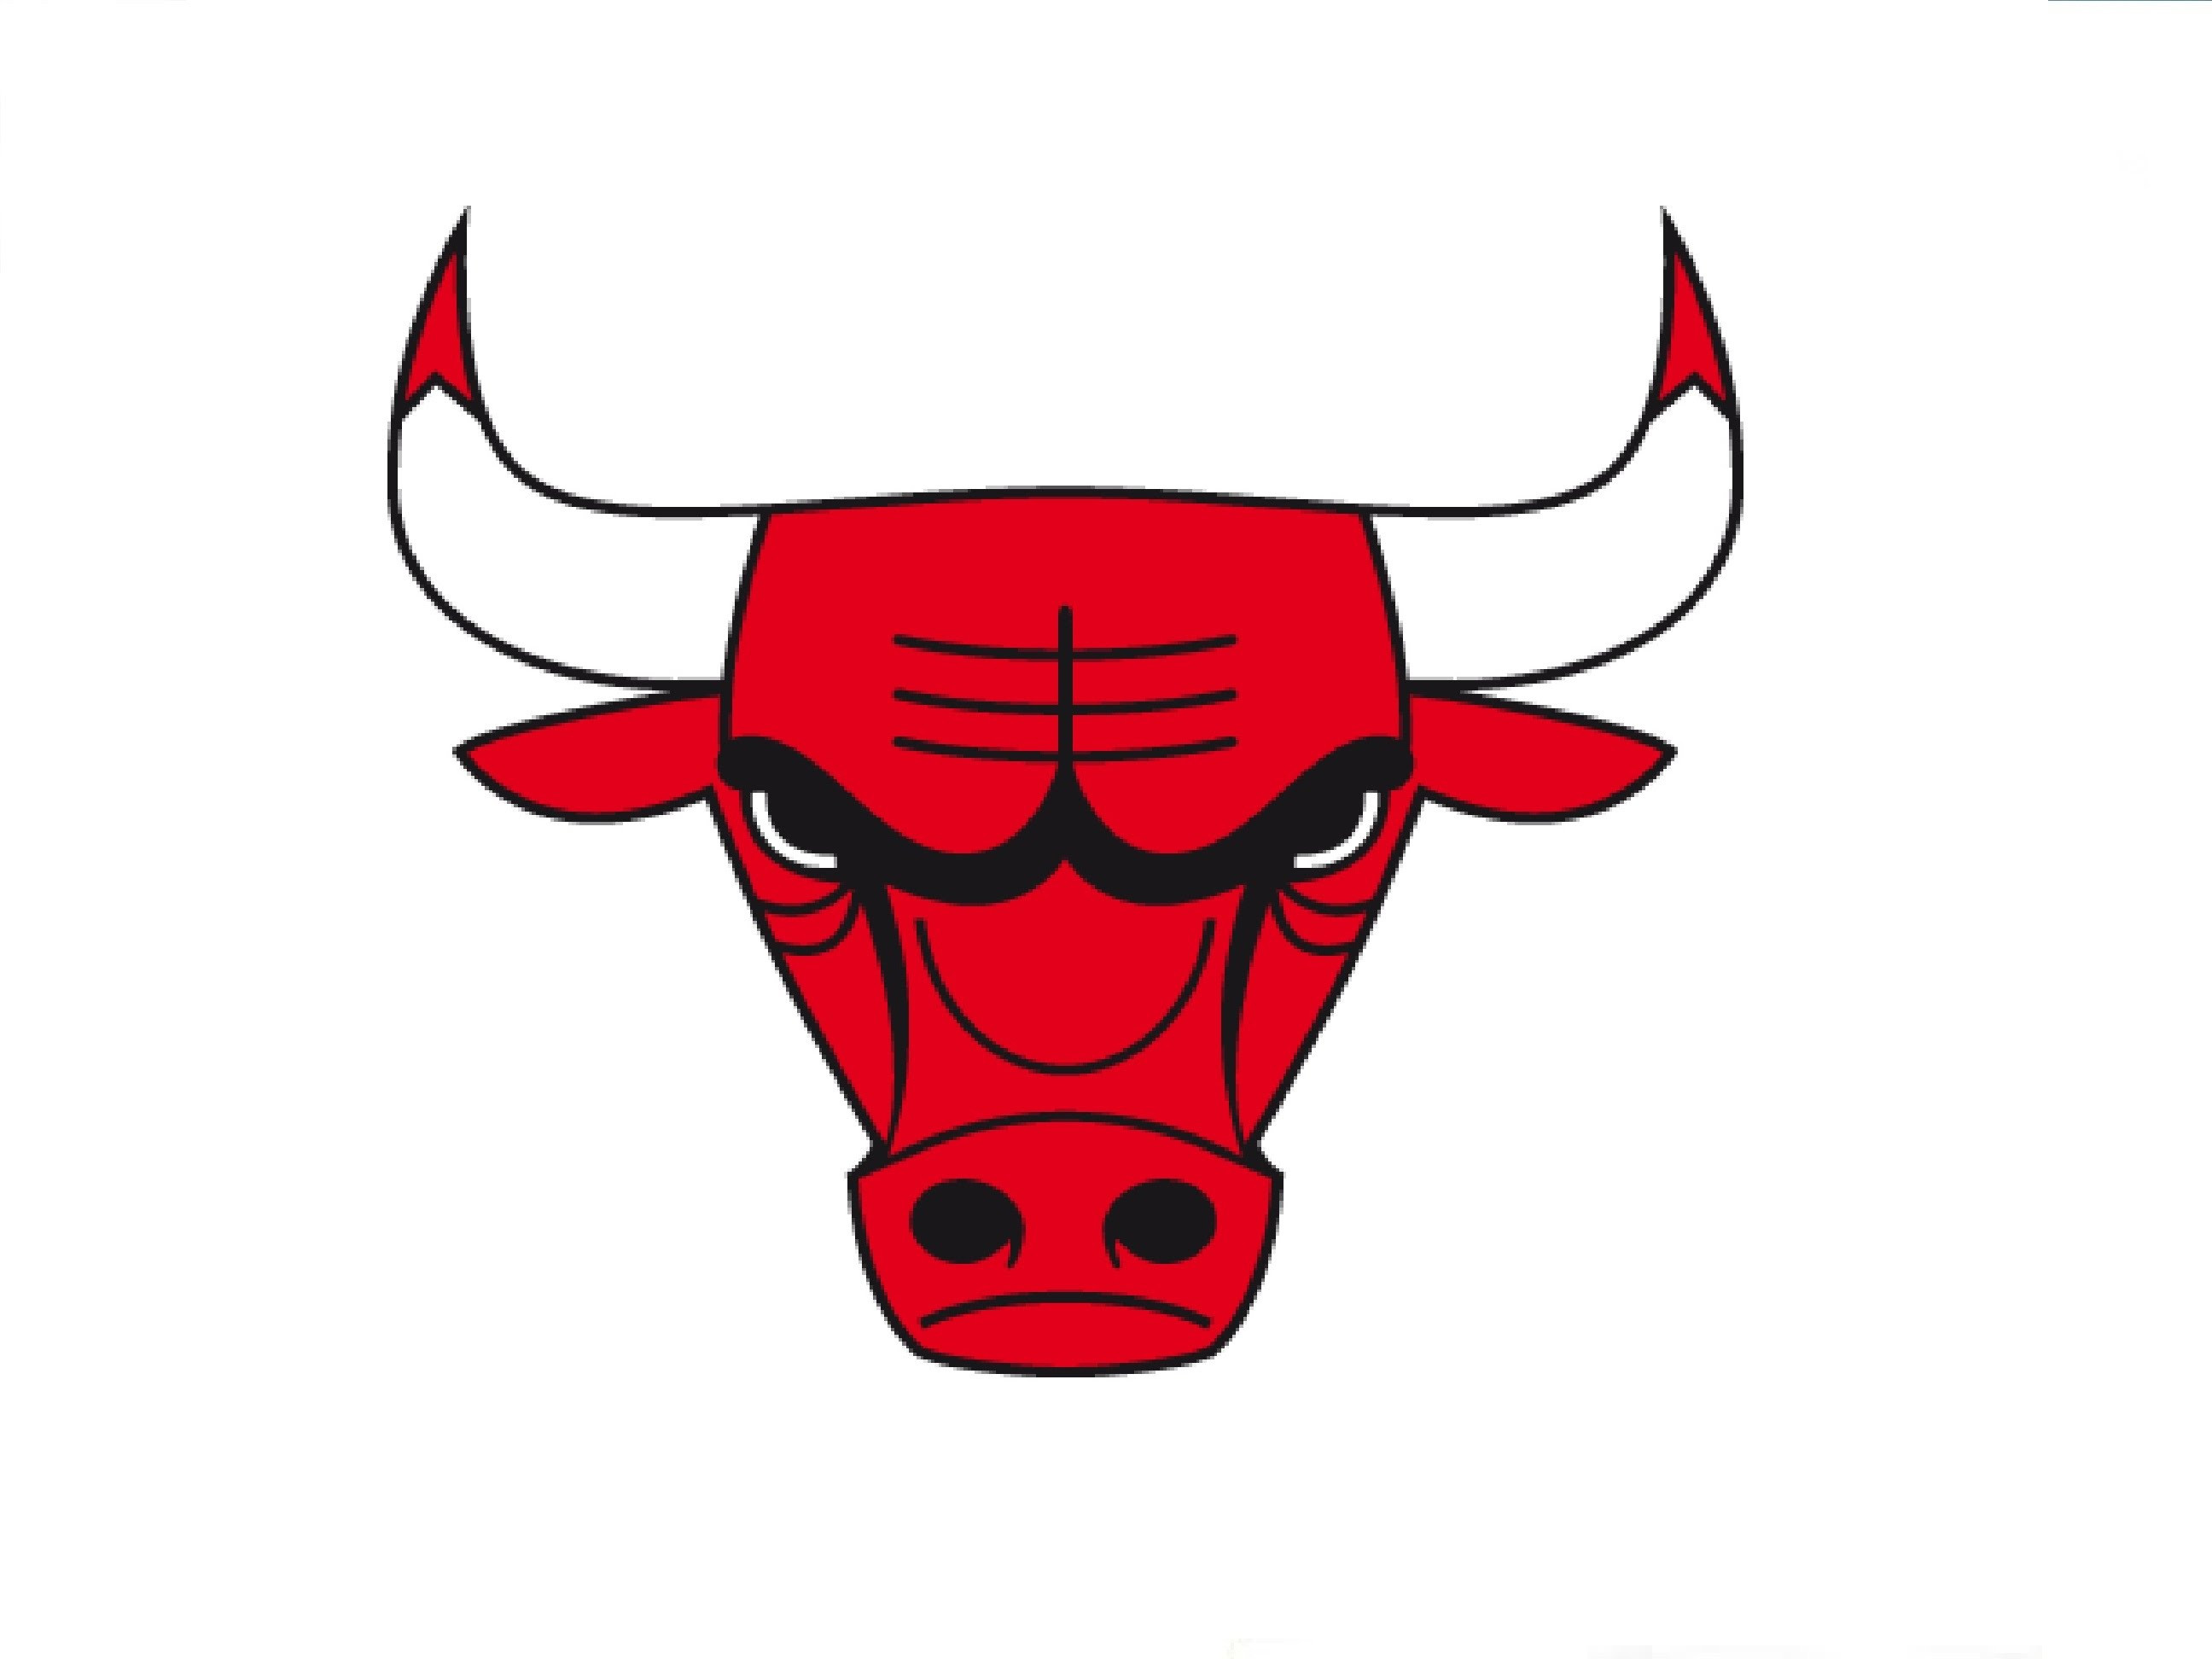 2592x1944 Red Bull Logo Drawing How To Draw A Chicago Bulls Logo / ÐÐ°Ðº ÐÐ°ÑÐ¸ÑÐ¾Ð²Ð°ÑÑ  ÐÐ½Ð°Ðº Ð§Ð¸ÐºÐ°Ð³Ð¾